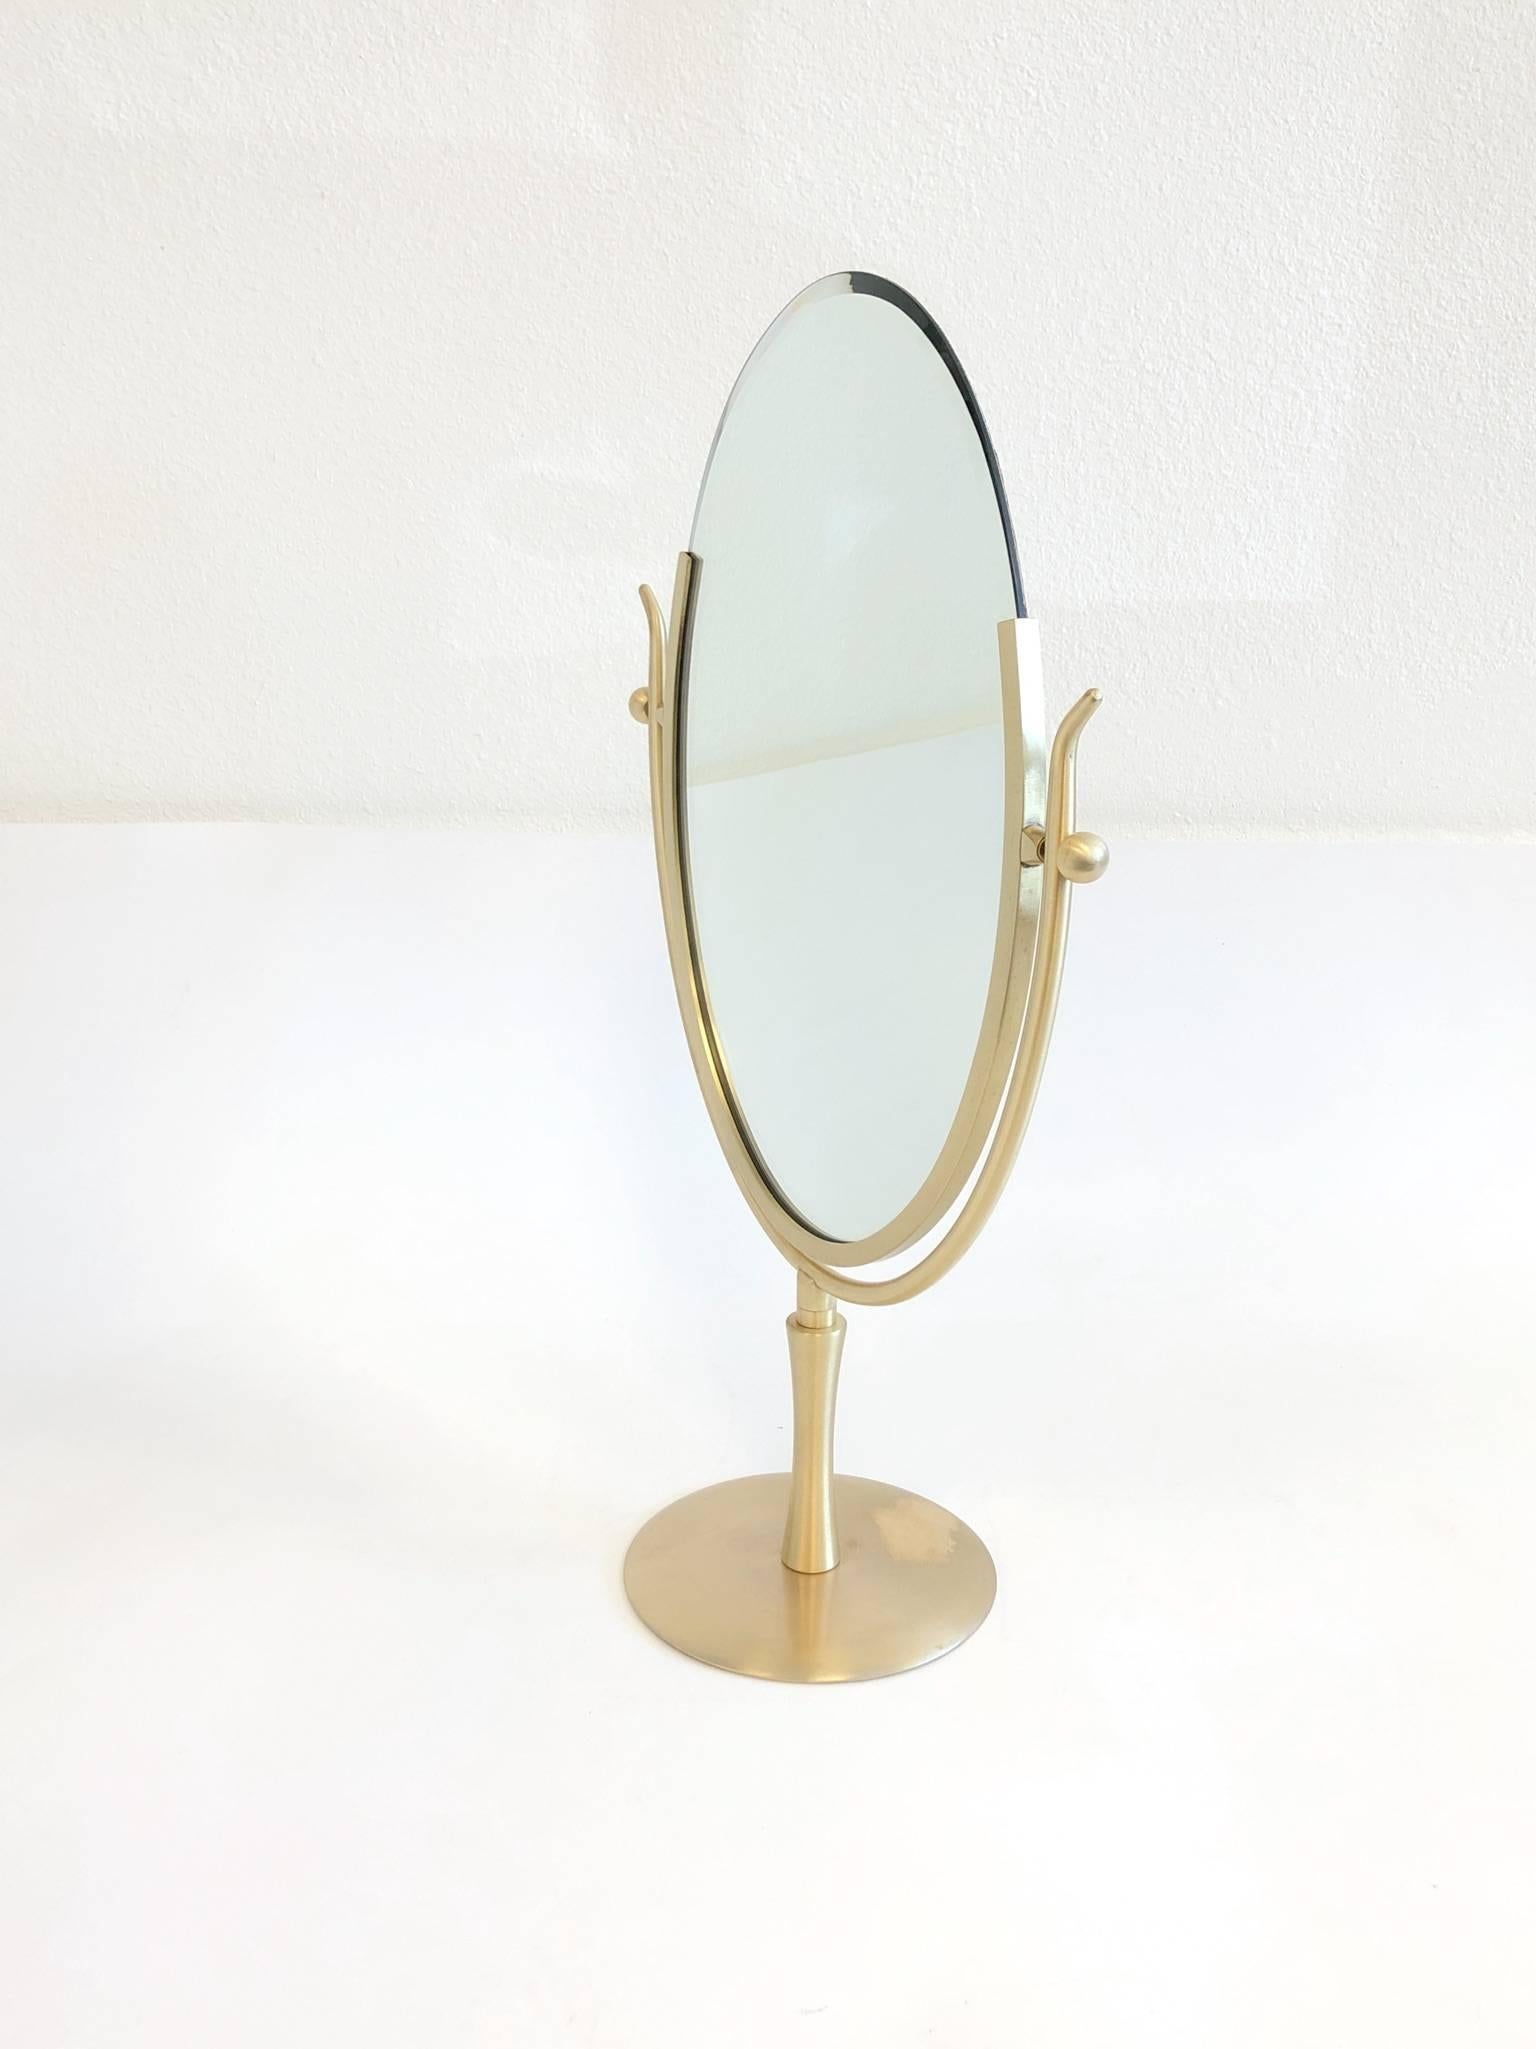 Brushed Satin Brass and Leather Vanity Mirror by Charles Hollis Jones